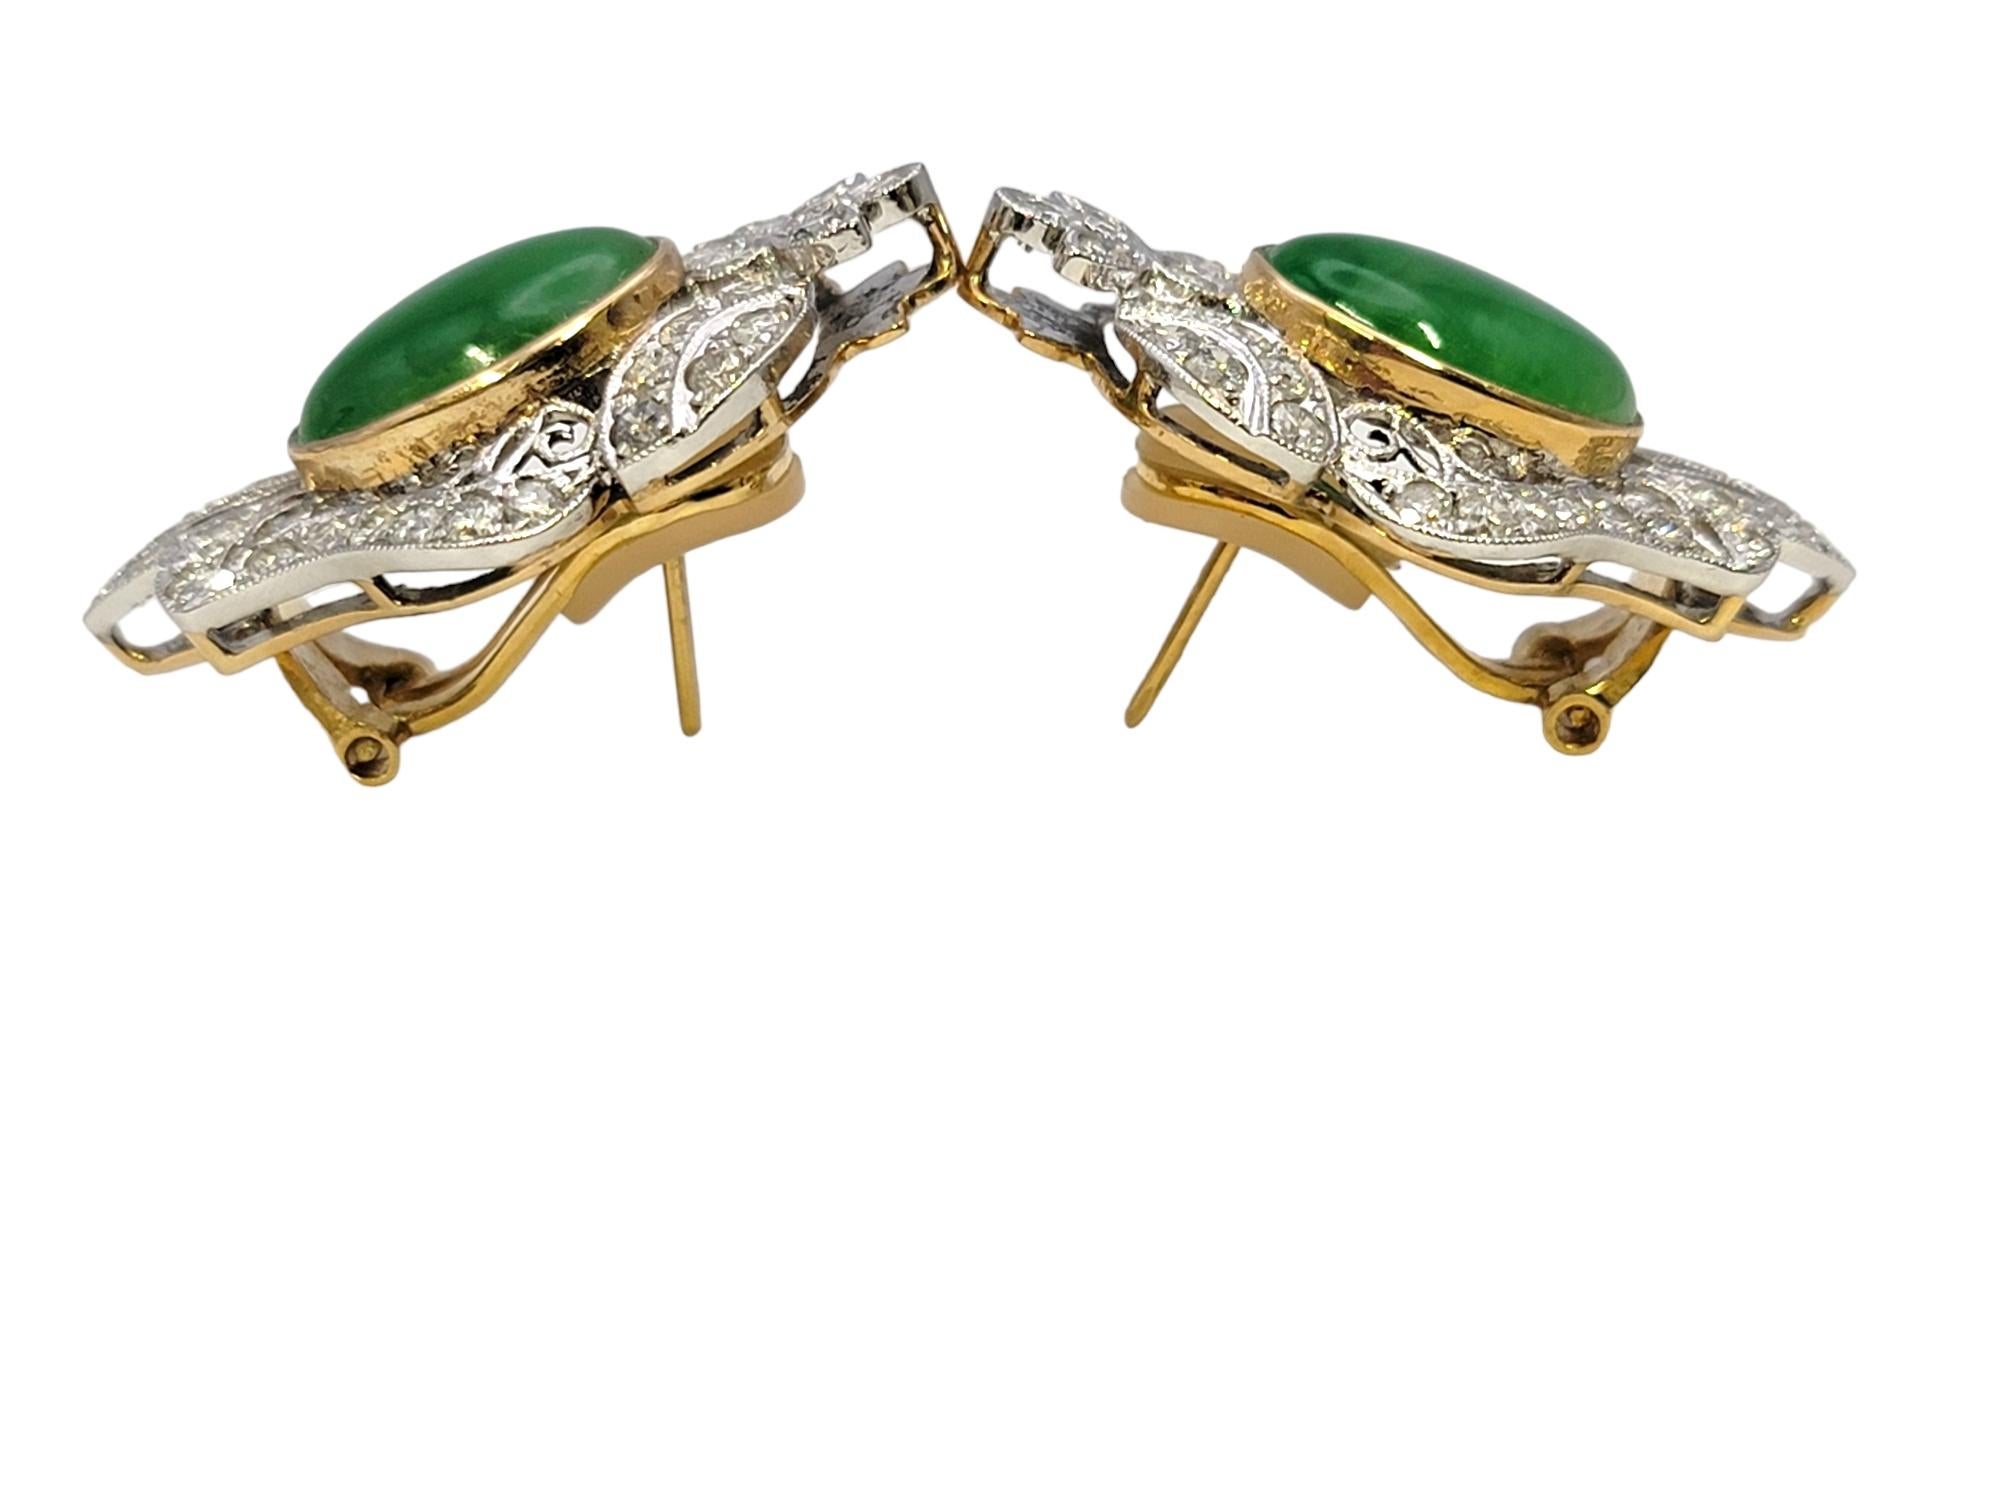 Oval Cut Vintage Style Cabochon Jade and Pave Diamond Pierced Earrings in 18 Karat Gold For Sale